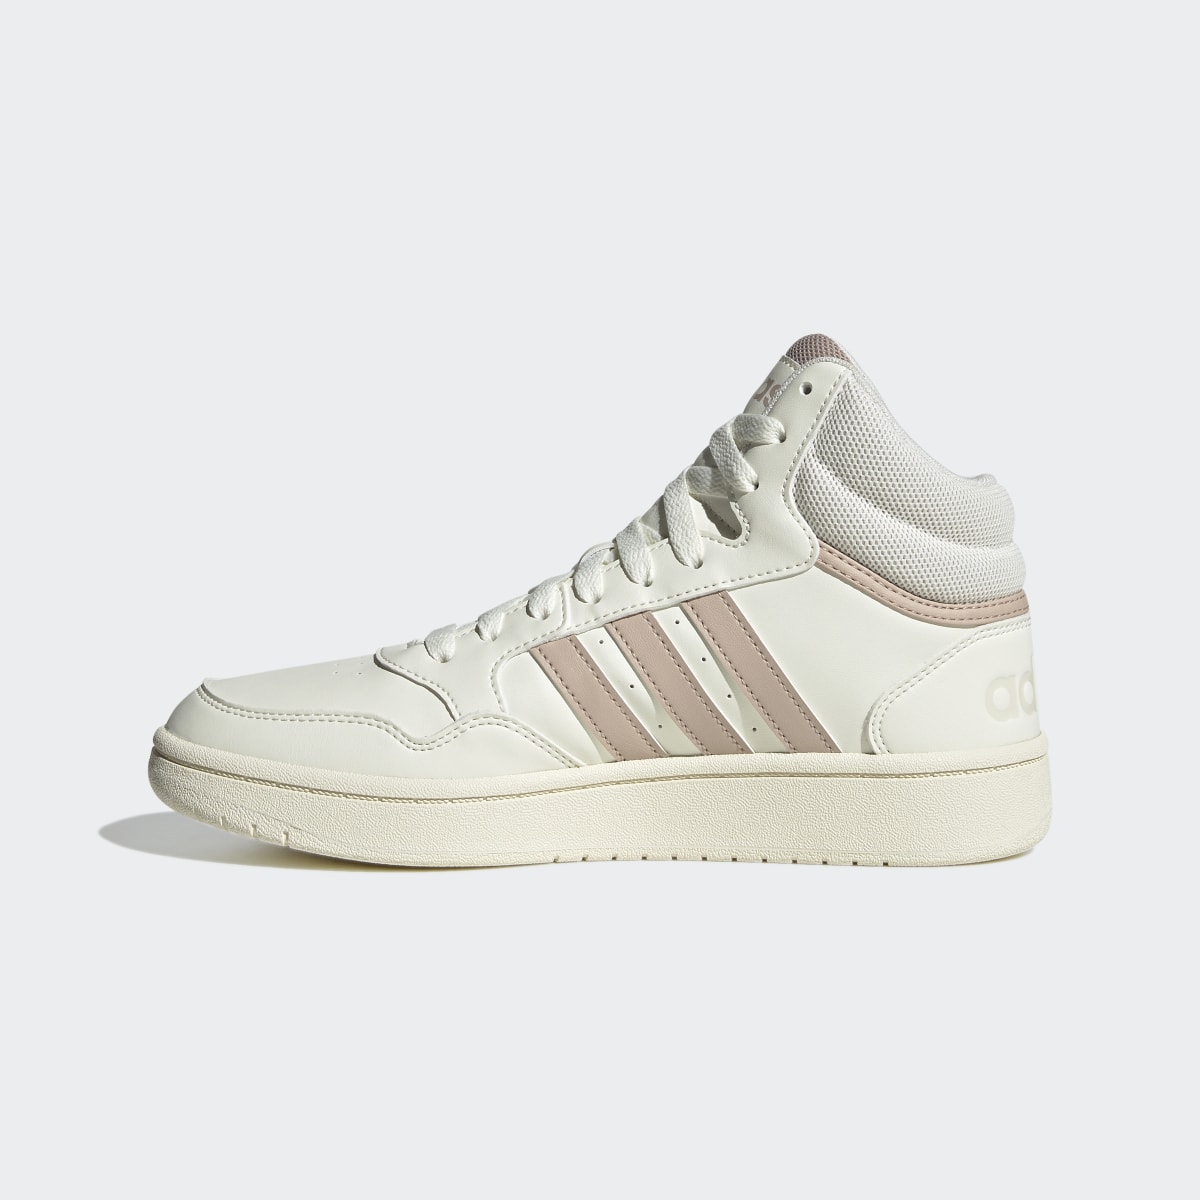 Adidas Hoops 3.0 Mid Classic Shoes. 7